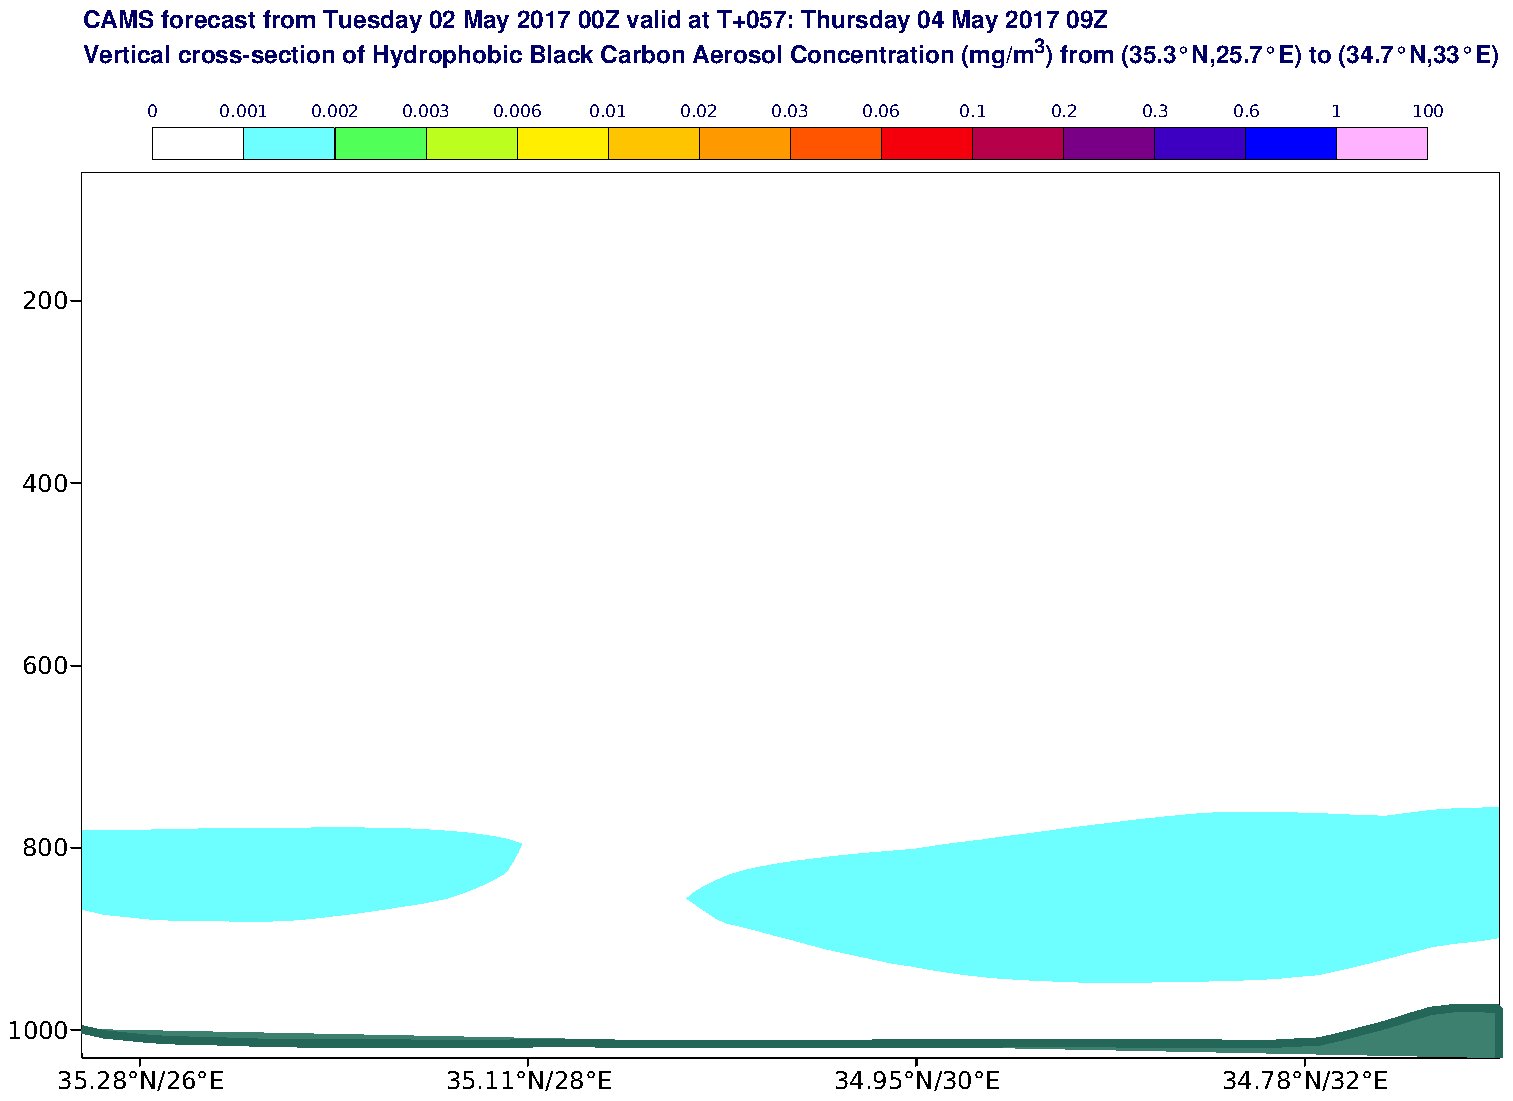 Vertical cross-section of Hydrophobic Black Carbon Aerosol Concentration (mg/m3) valid at T57 - 2017-05-04 09:00